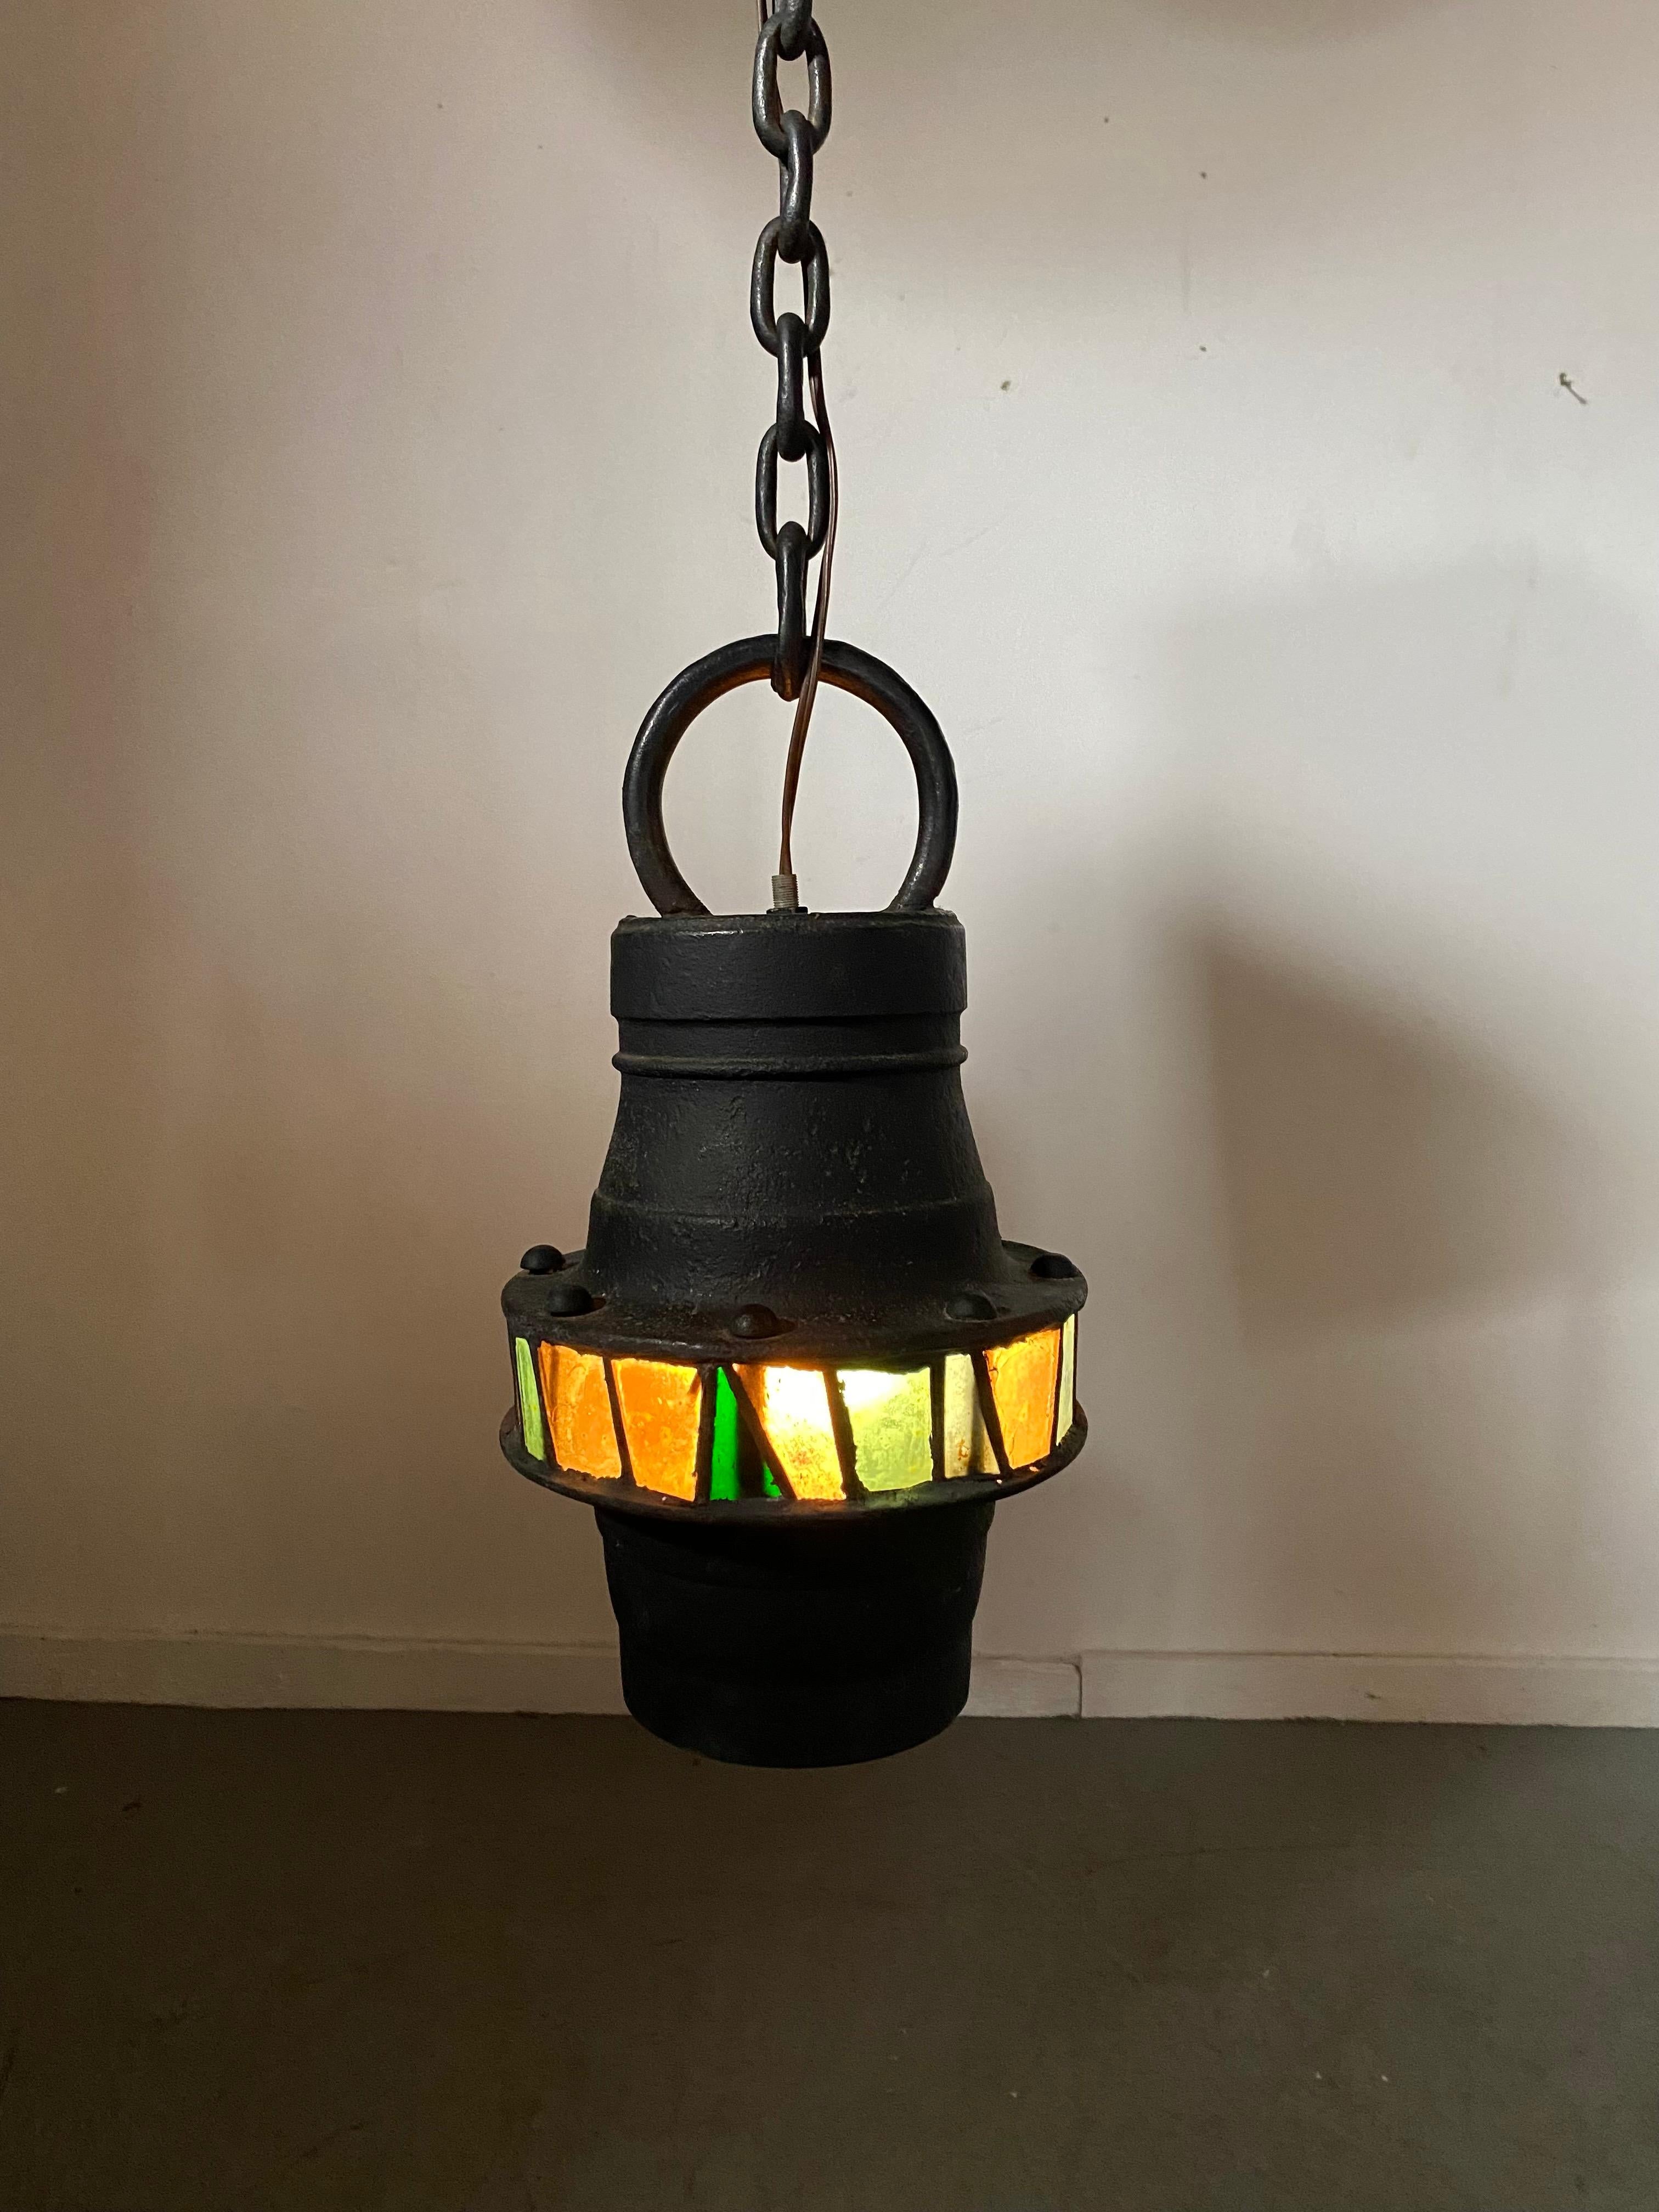 Brutalist Hand-Crafted Iron and stained Glass Hanging Pendant Lamp, c. 1960's For Sale 4